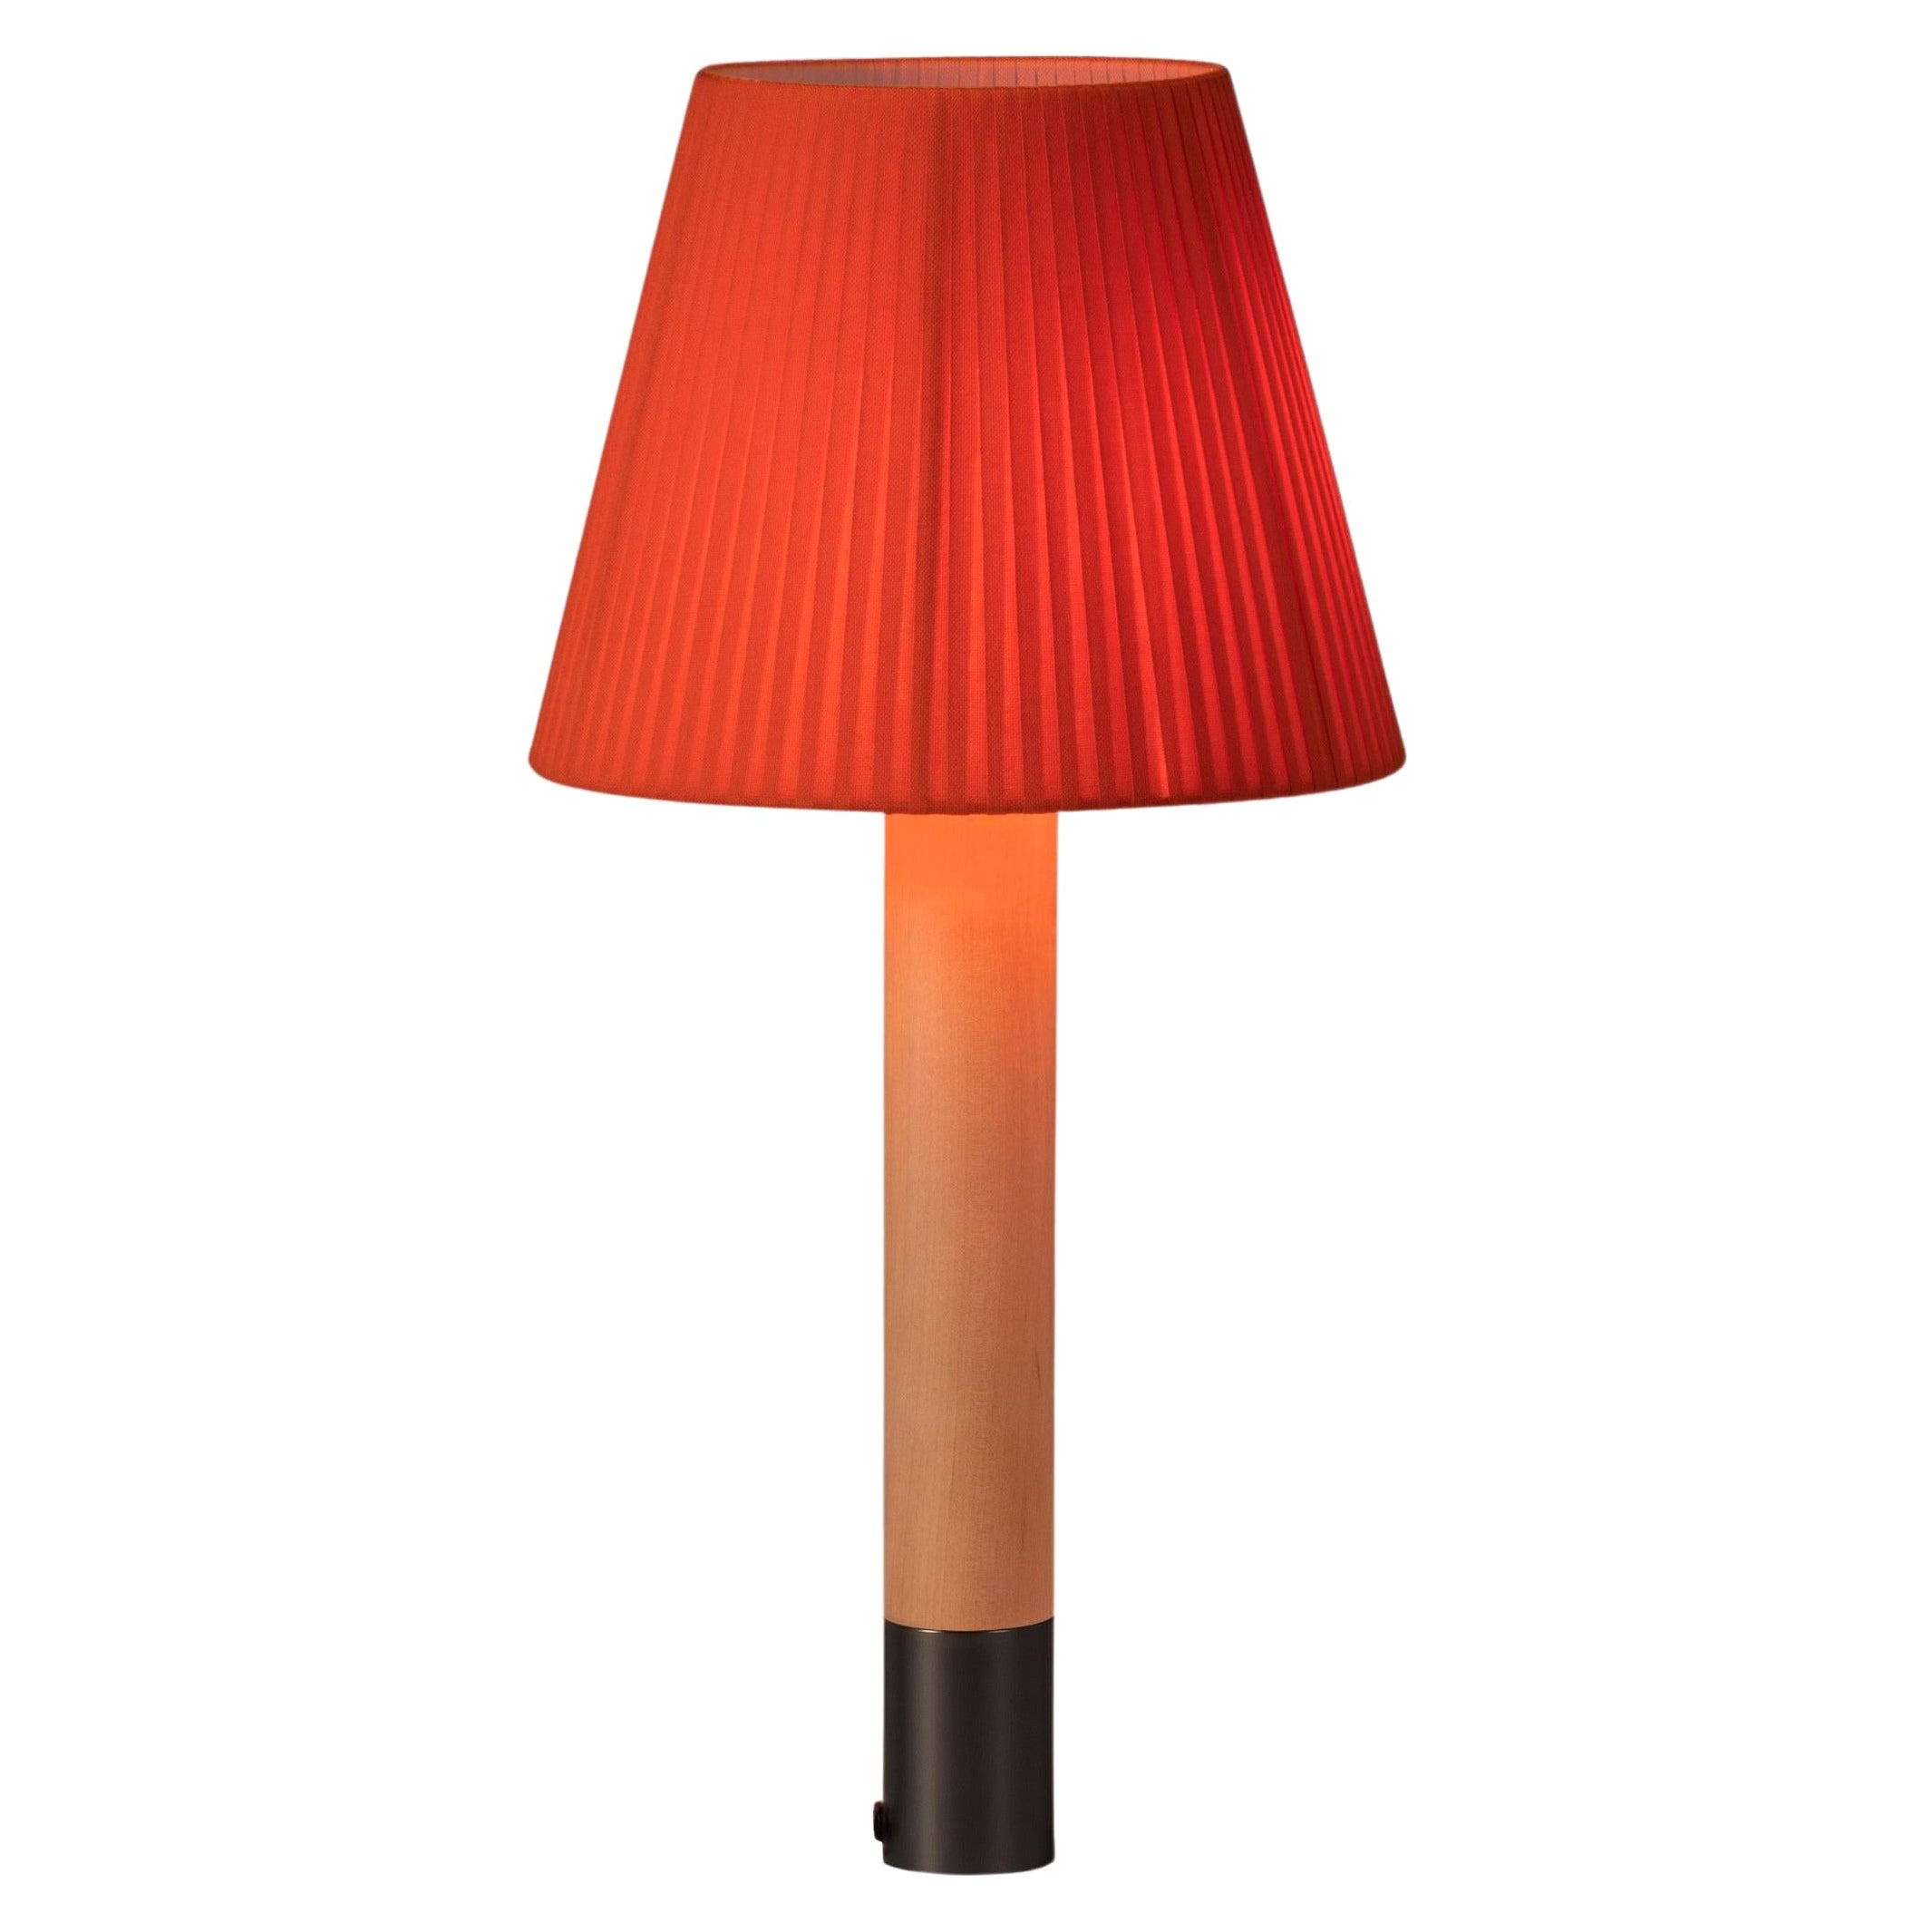 Bronze and Red Básica M1 Table Lamp by Santiago Roqueta, Santa & Cole